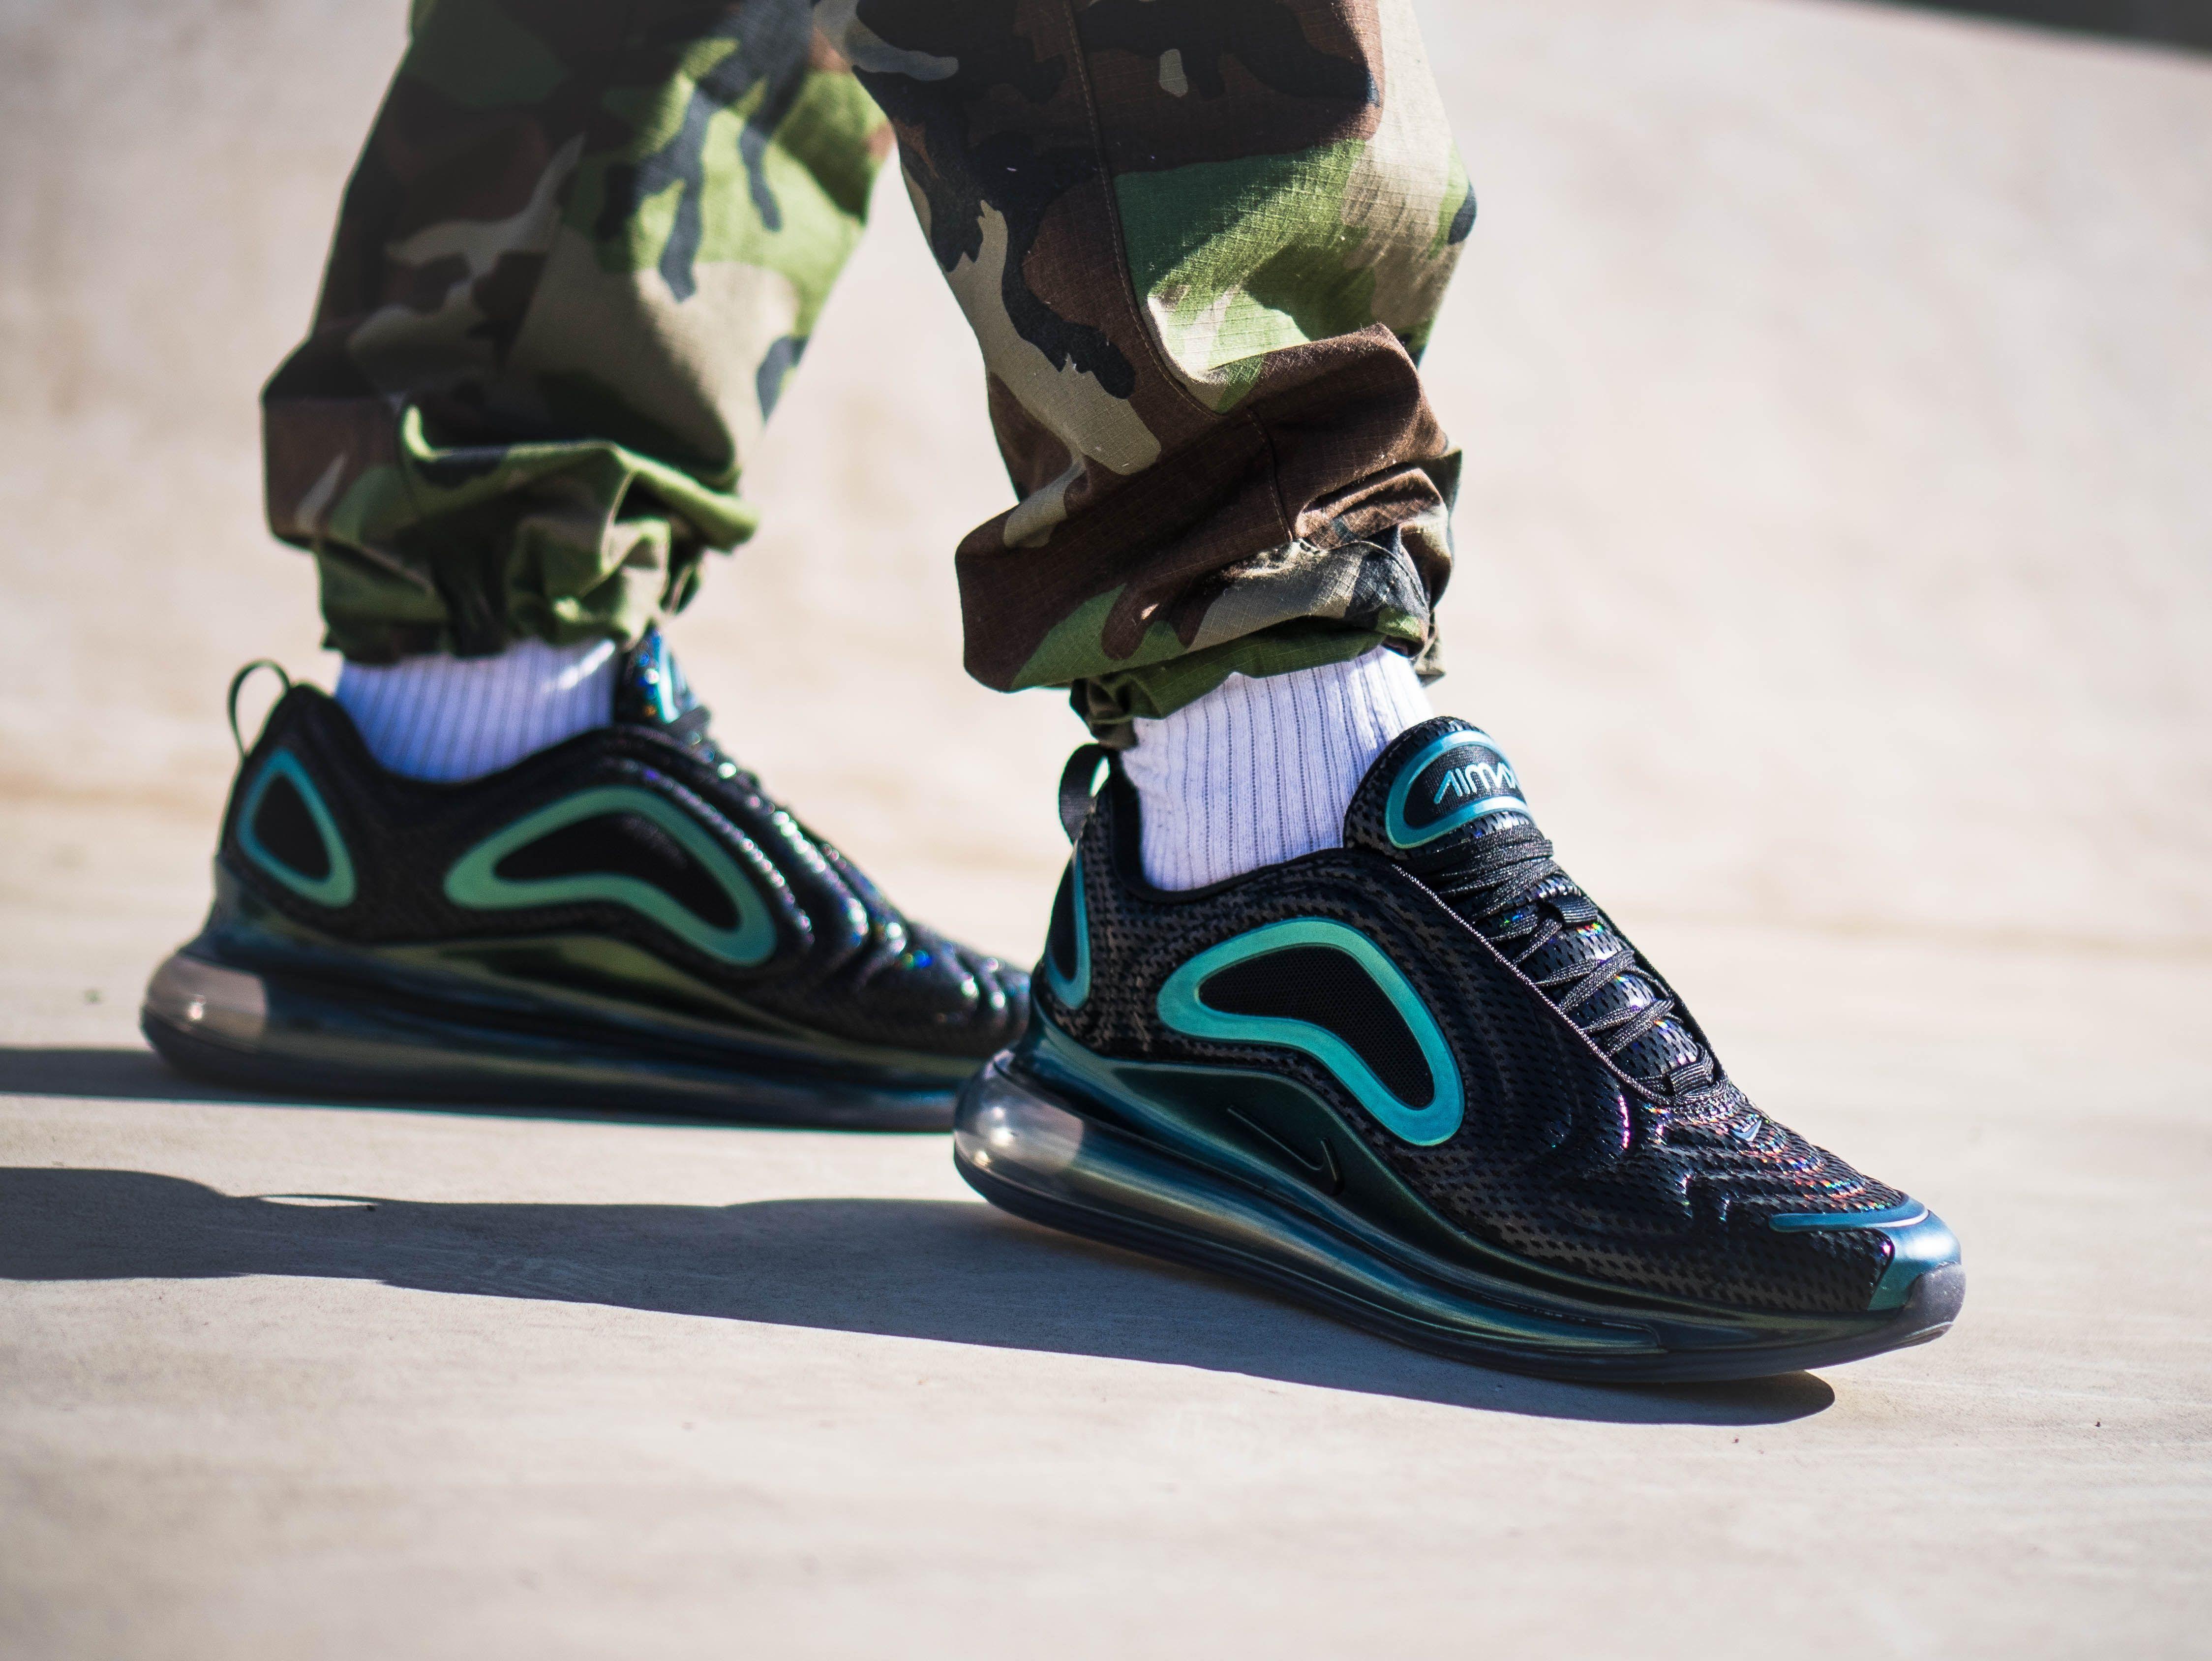 all air max 720 colorways